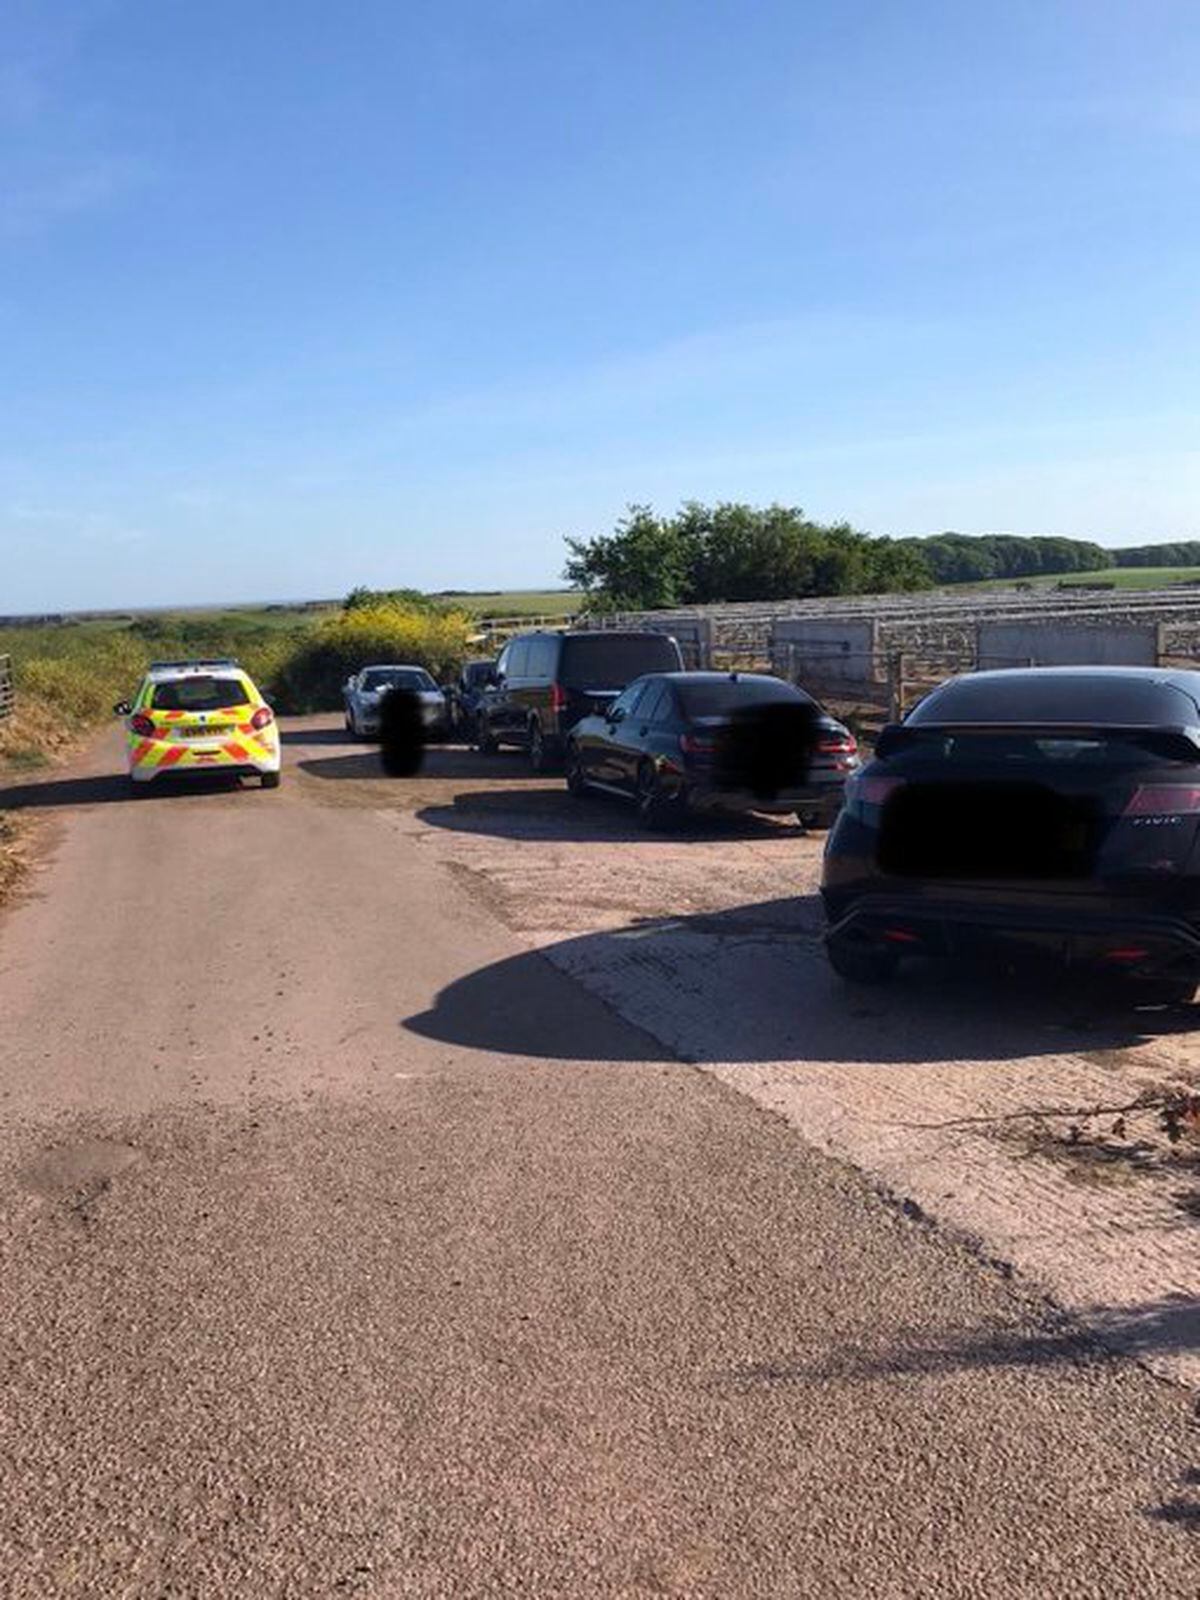 A total of 13 people went to Stackpole in Pembrokeshire - and were fined. Photo: Pembroke Dock police